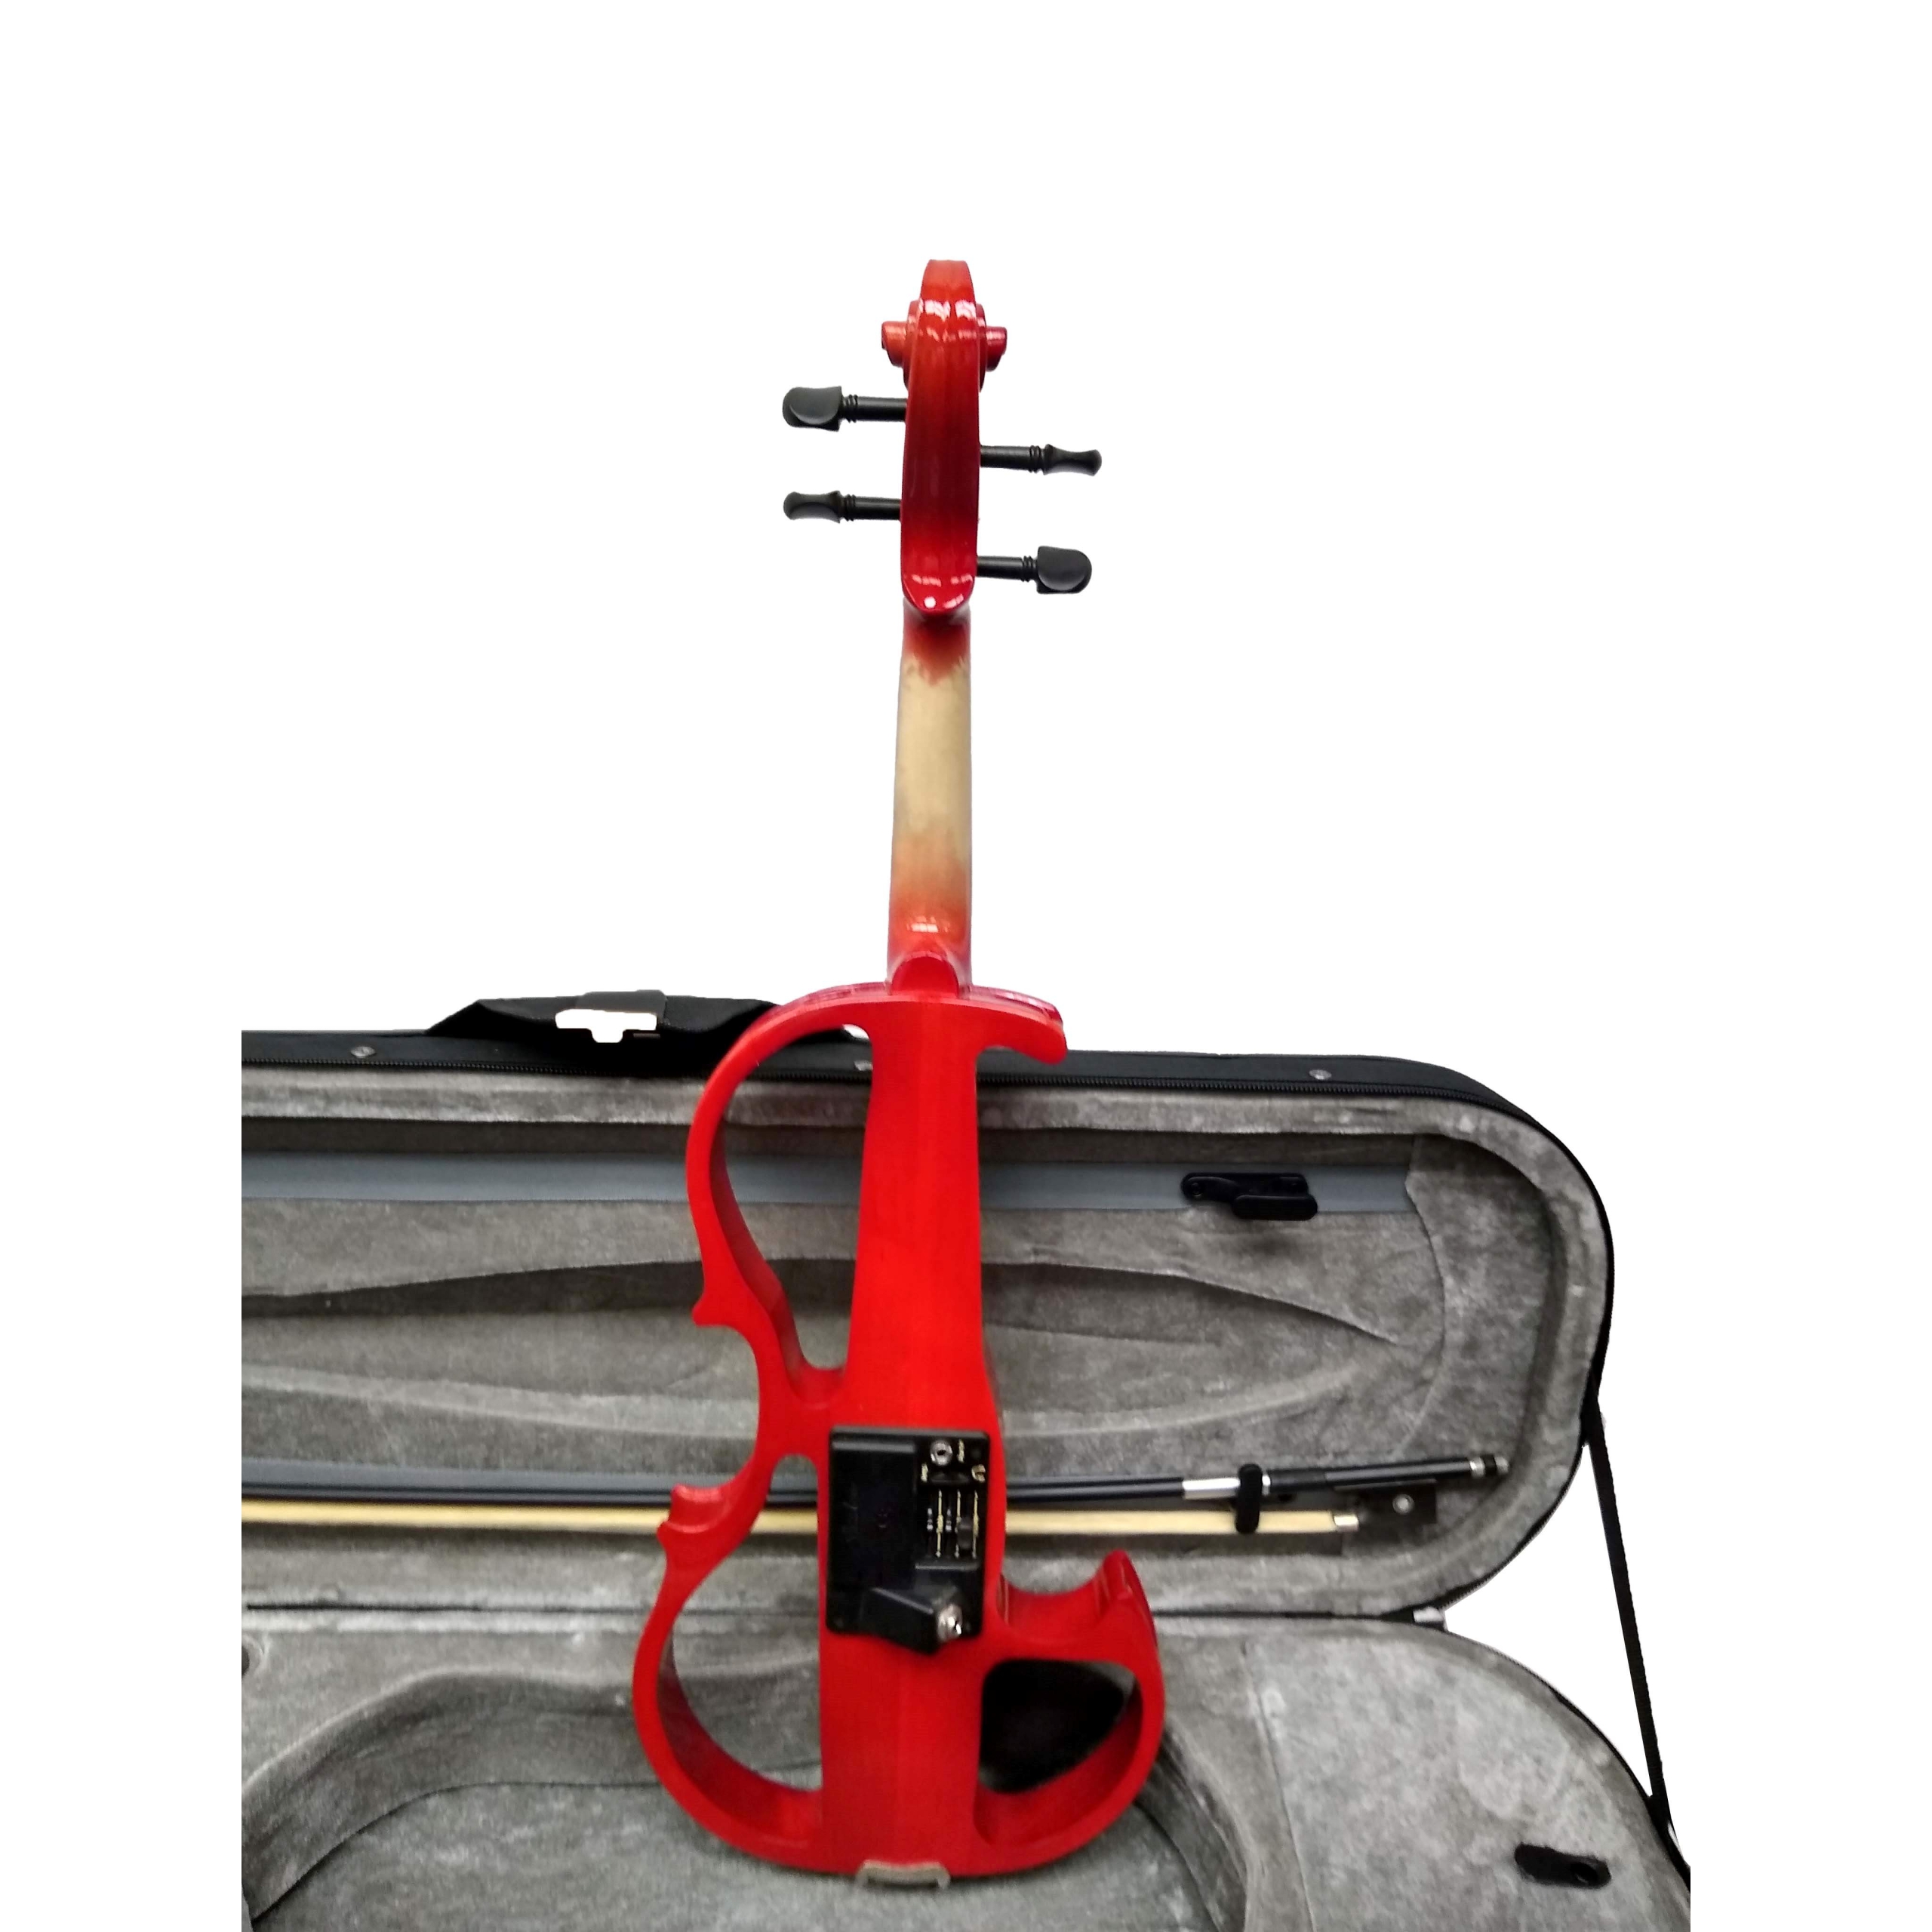   Electra Violin Shaped Cutaway Speedway - Red